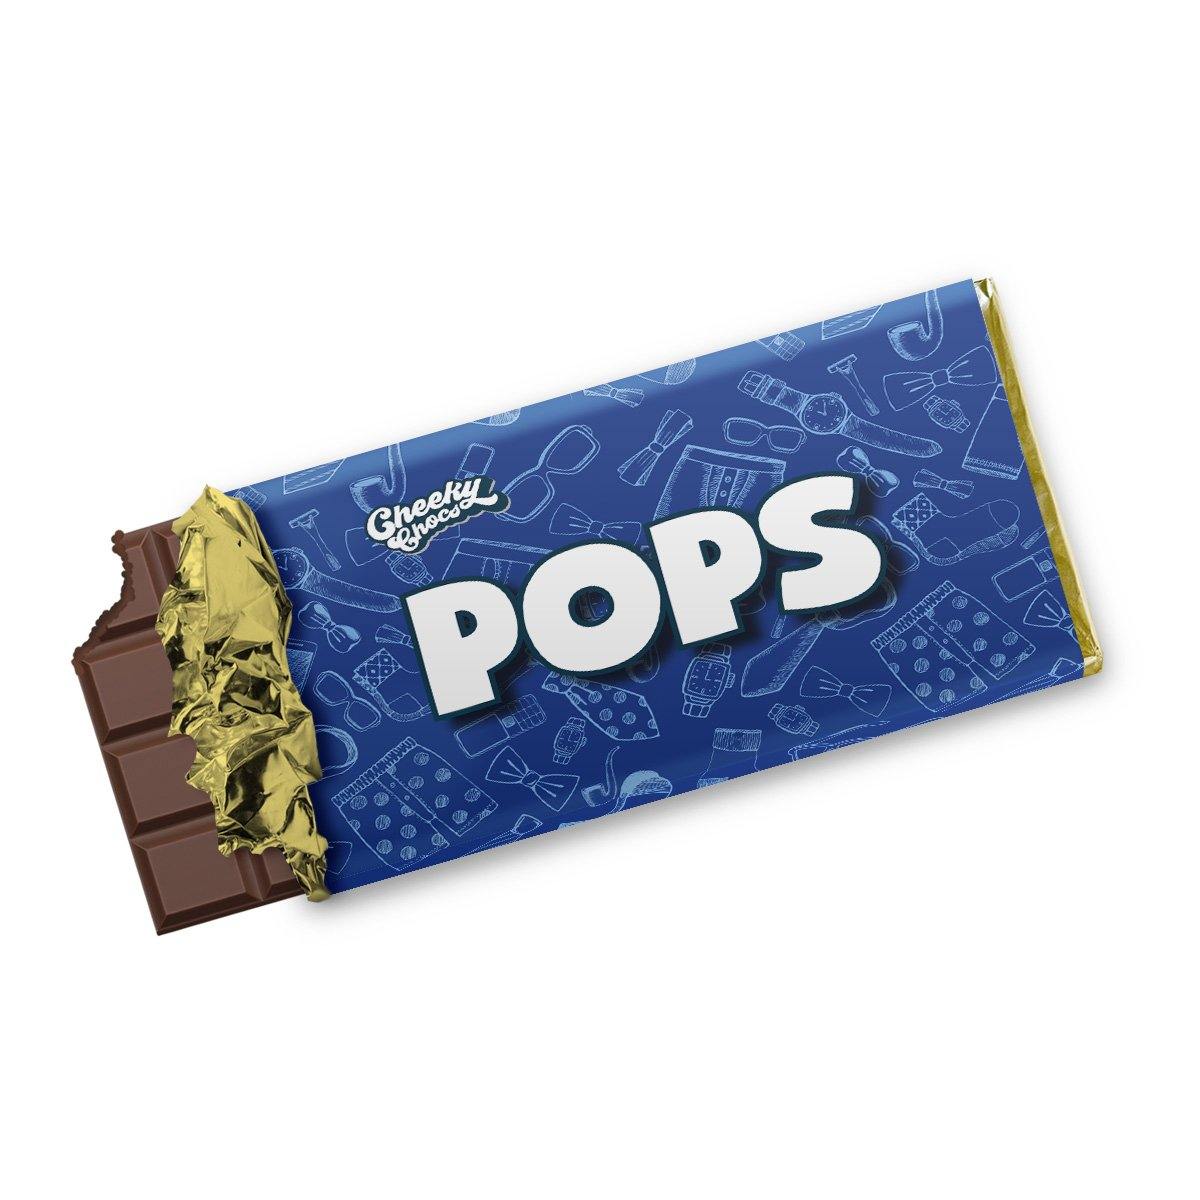 Pops Novelty Chocolate Wrapper Cheeky Chocs 2542